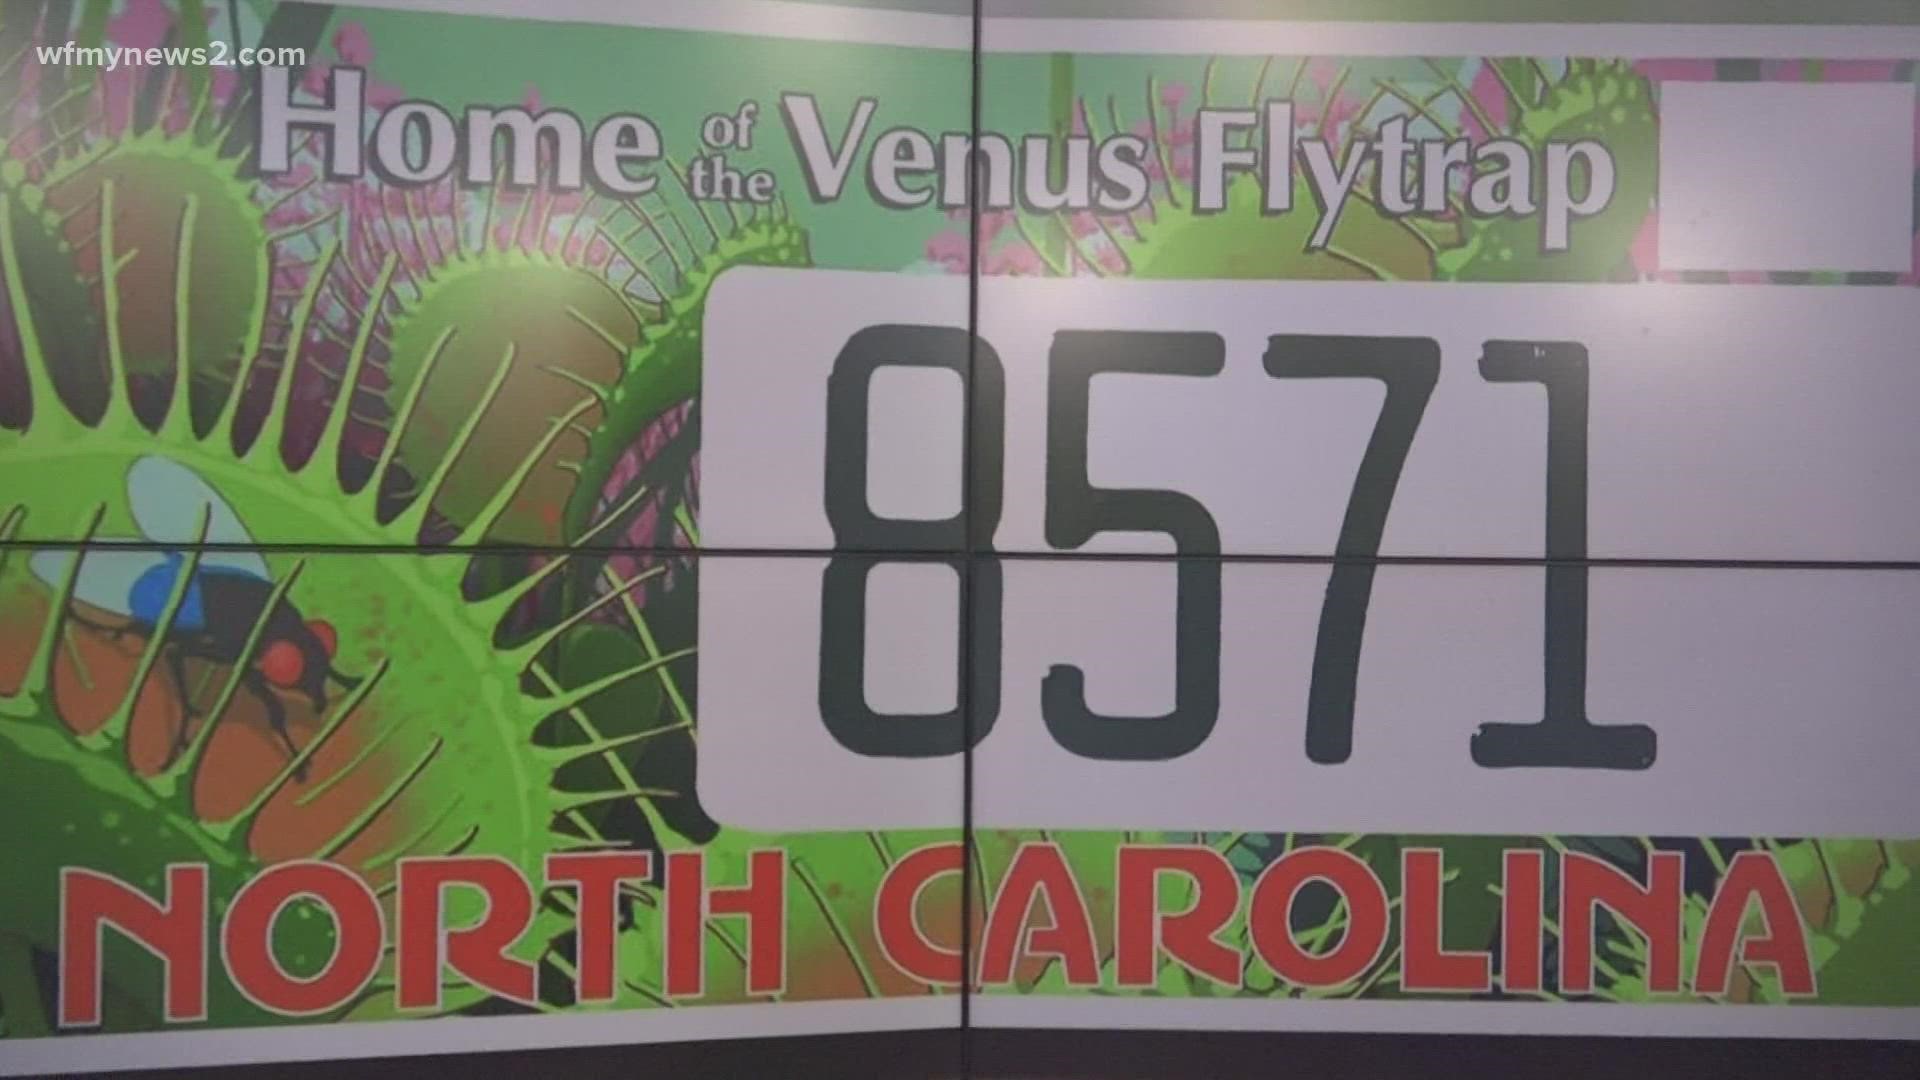 House Bill 435 includes license plates for the Venus Flytrap, "My Pet is Family," "Electric Vehicle," NC Association of Firefighters, and the NC Special Olympics.